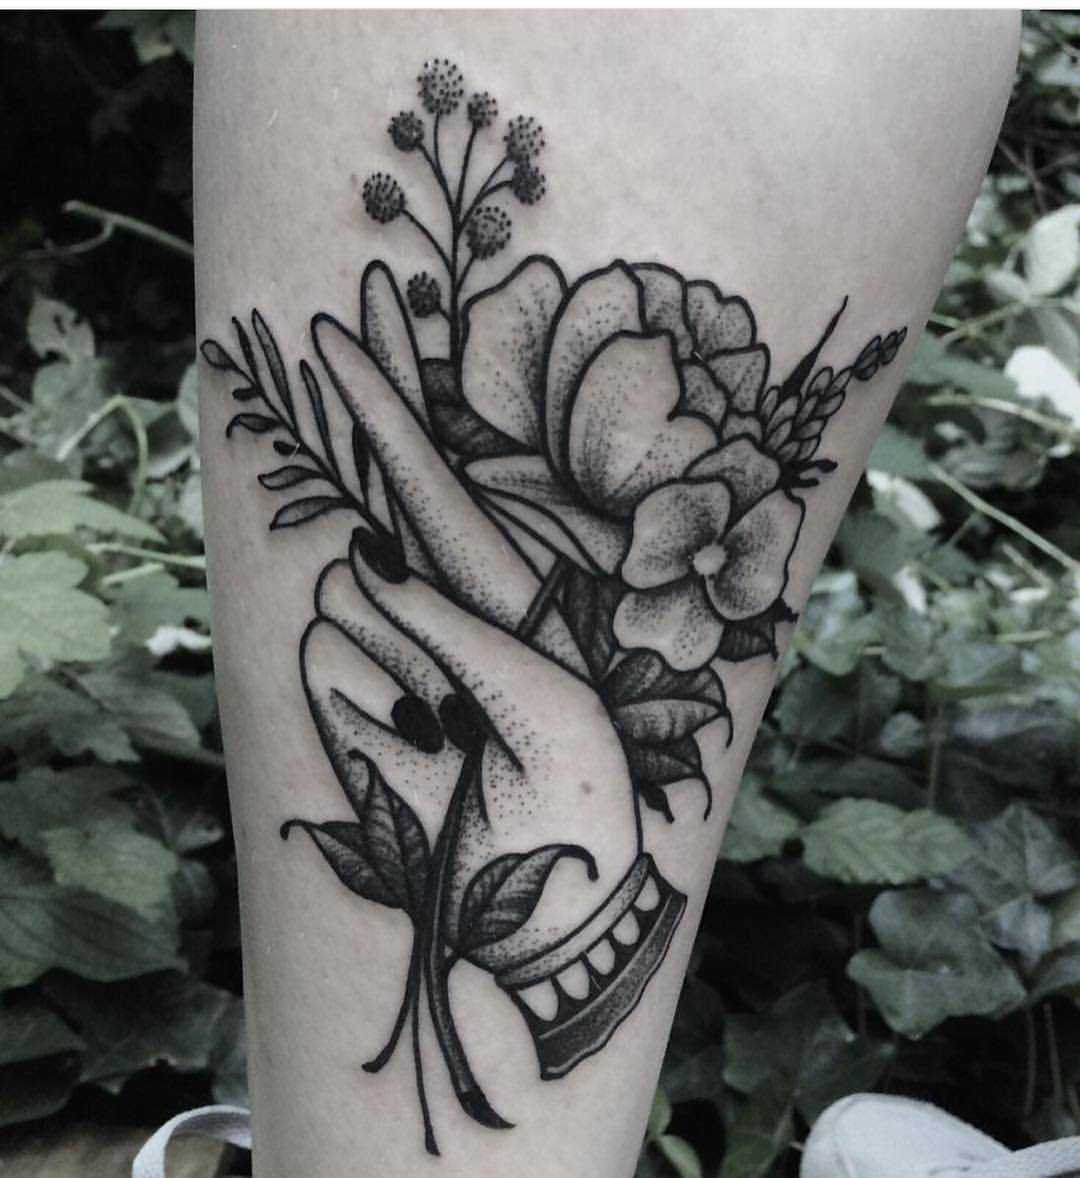 Hand with flower by Roald Vd Broek